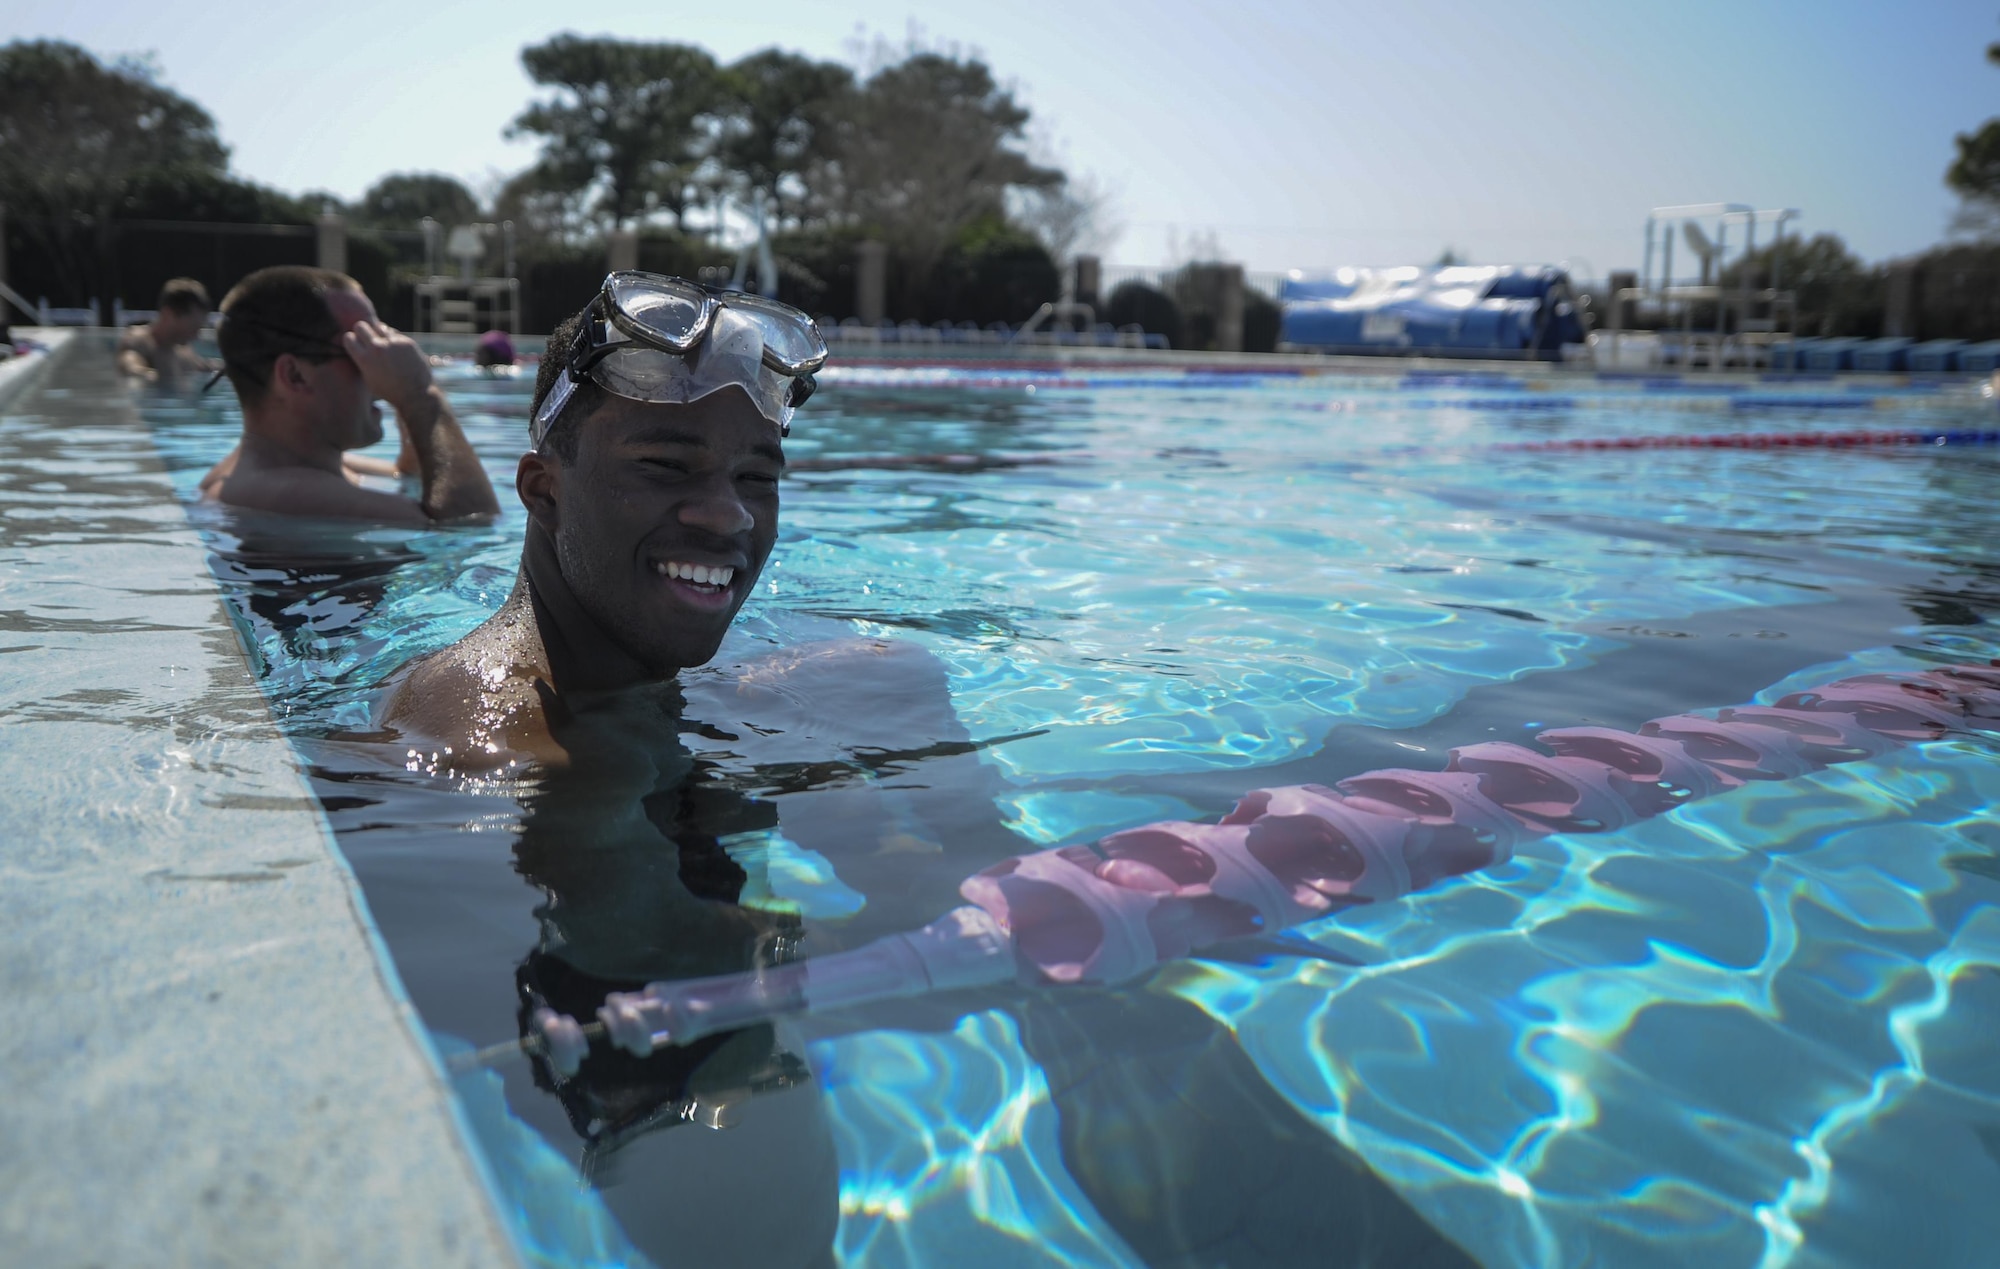 An Air Commando uses the pool at the aquatic center on Hurlburt Field, Fla., Feb. 14, 2017. The Hurlburt Field Aquatic Center reopened Feb. 1, 2017, after renovations were made to the pool deck and bathrooms, and a handicap lift was installed. (U.S. Air Force photo by Airman 1st Class Dennis Spain)